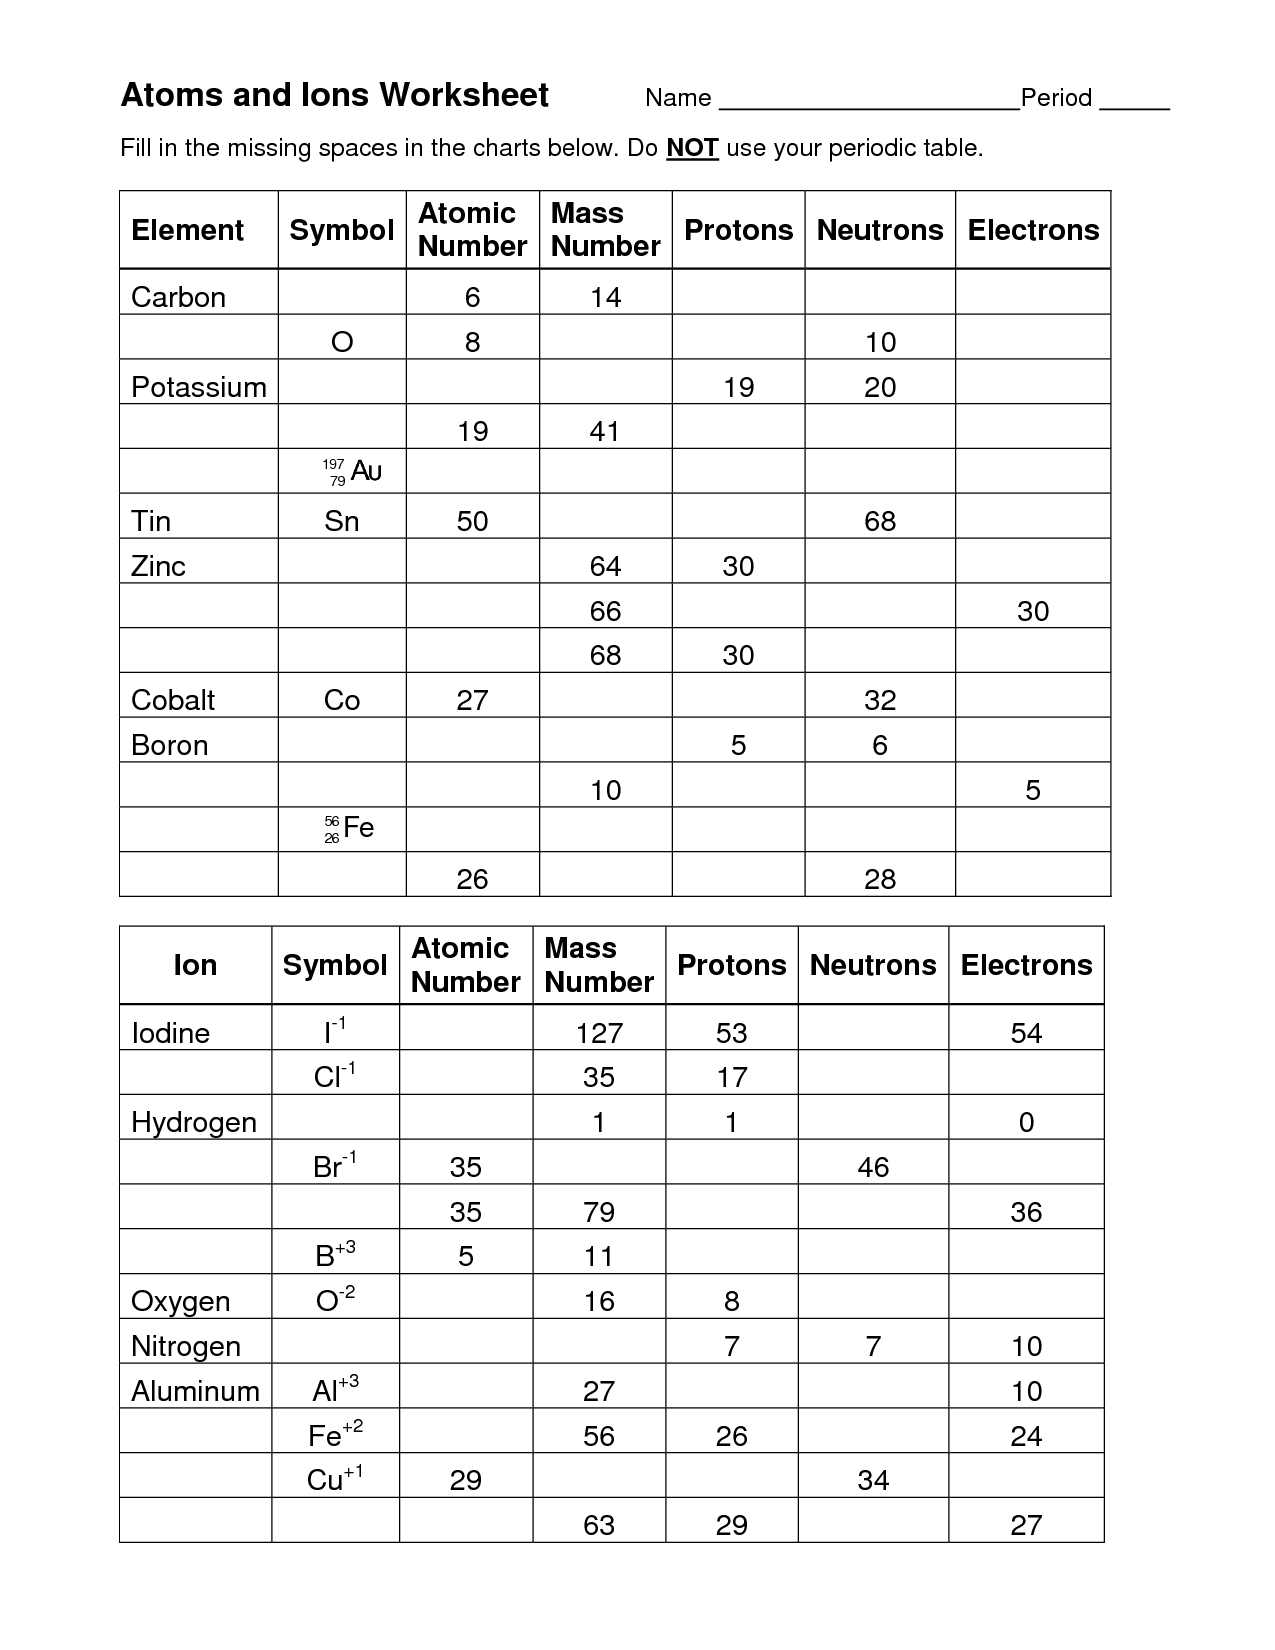 ions-worksheet-answer-key-free-download-goodimg-co